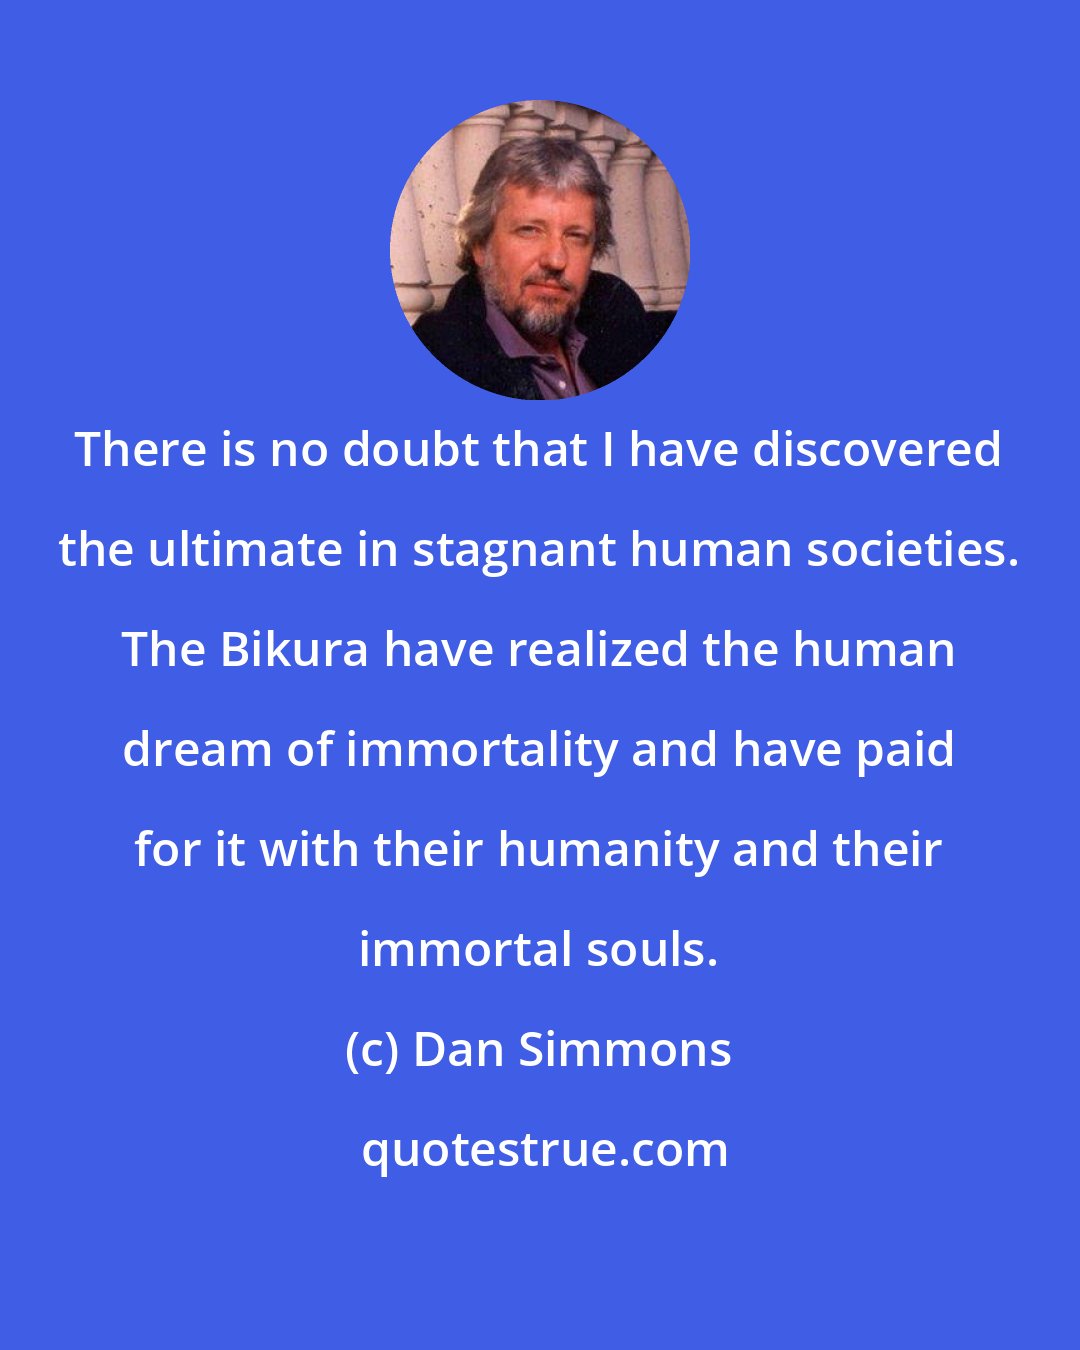 Dan Simmons: There is no doubt that I have discovered the ultimate in stagnant human societies. The Bikura have realized the human dream of immortality and have paid for it with their humanity and their immortal souls.